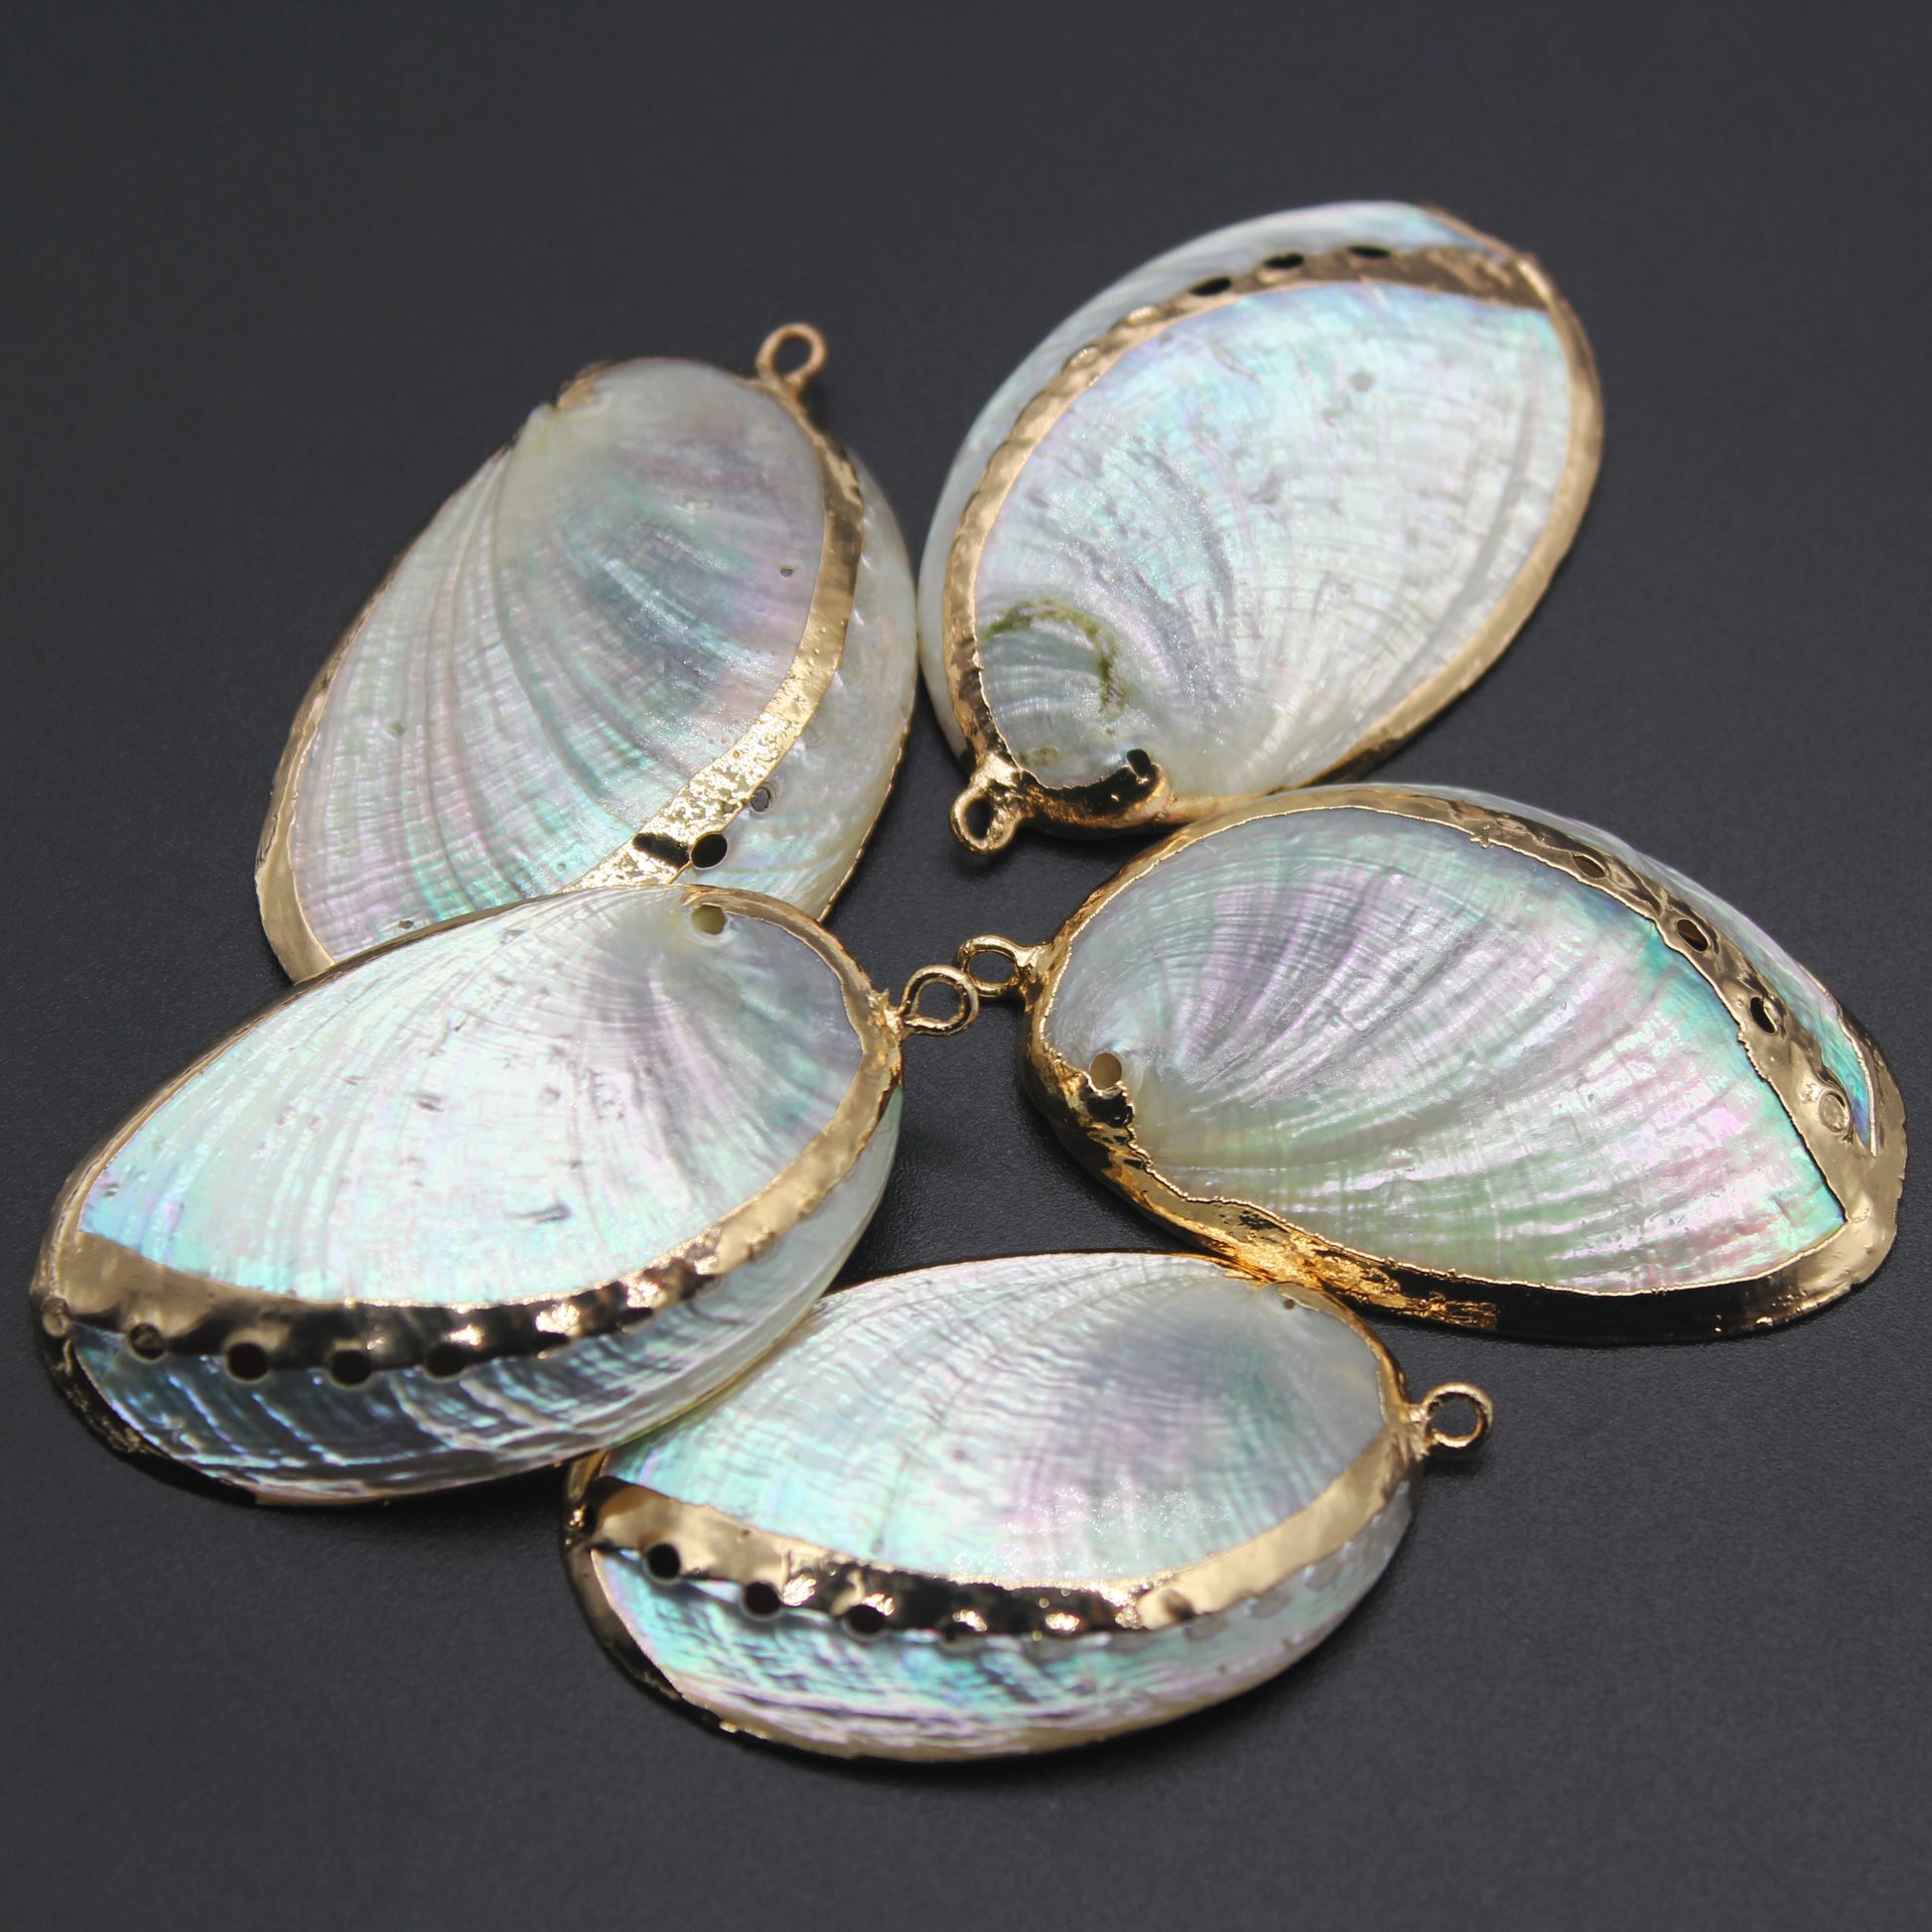 Natural Abalone Shell Pendant Beads Personality Ornaments For Jewelry Making DIY Necklace Earring Bracelet Handmade Accessories - Charlie Dolly